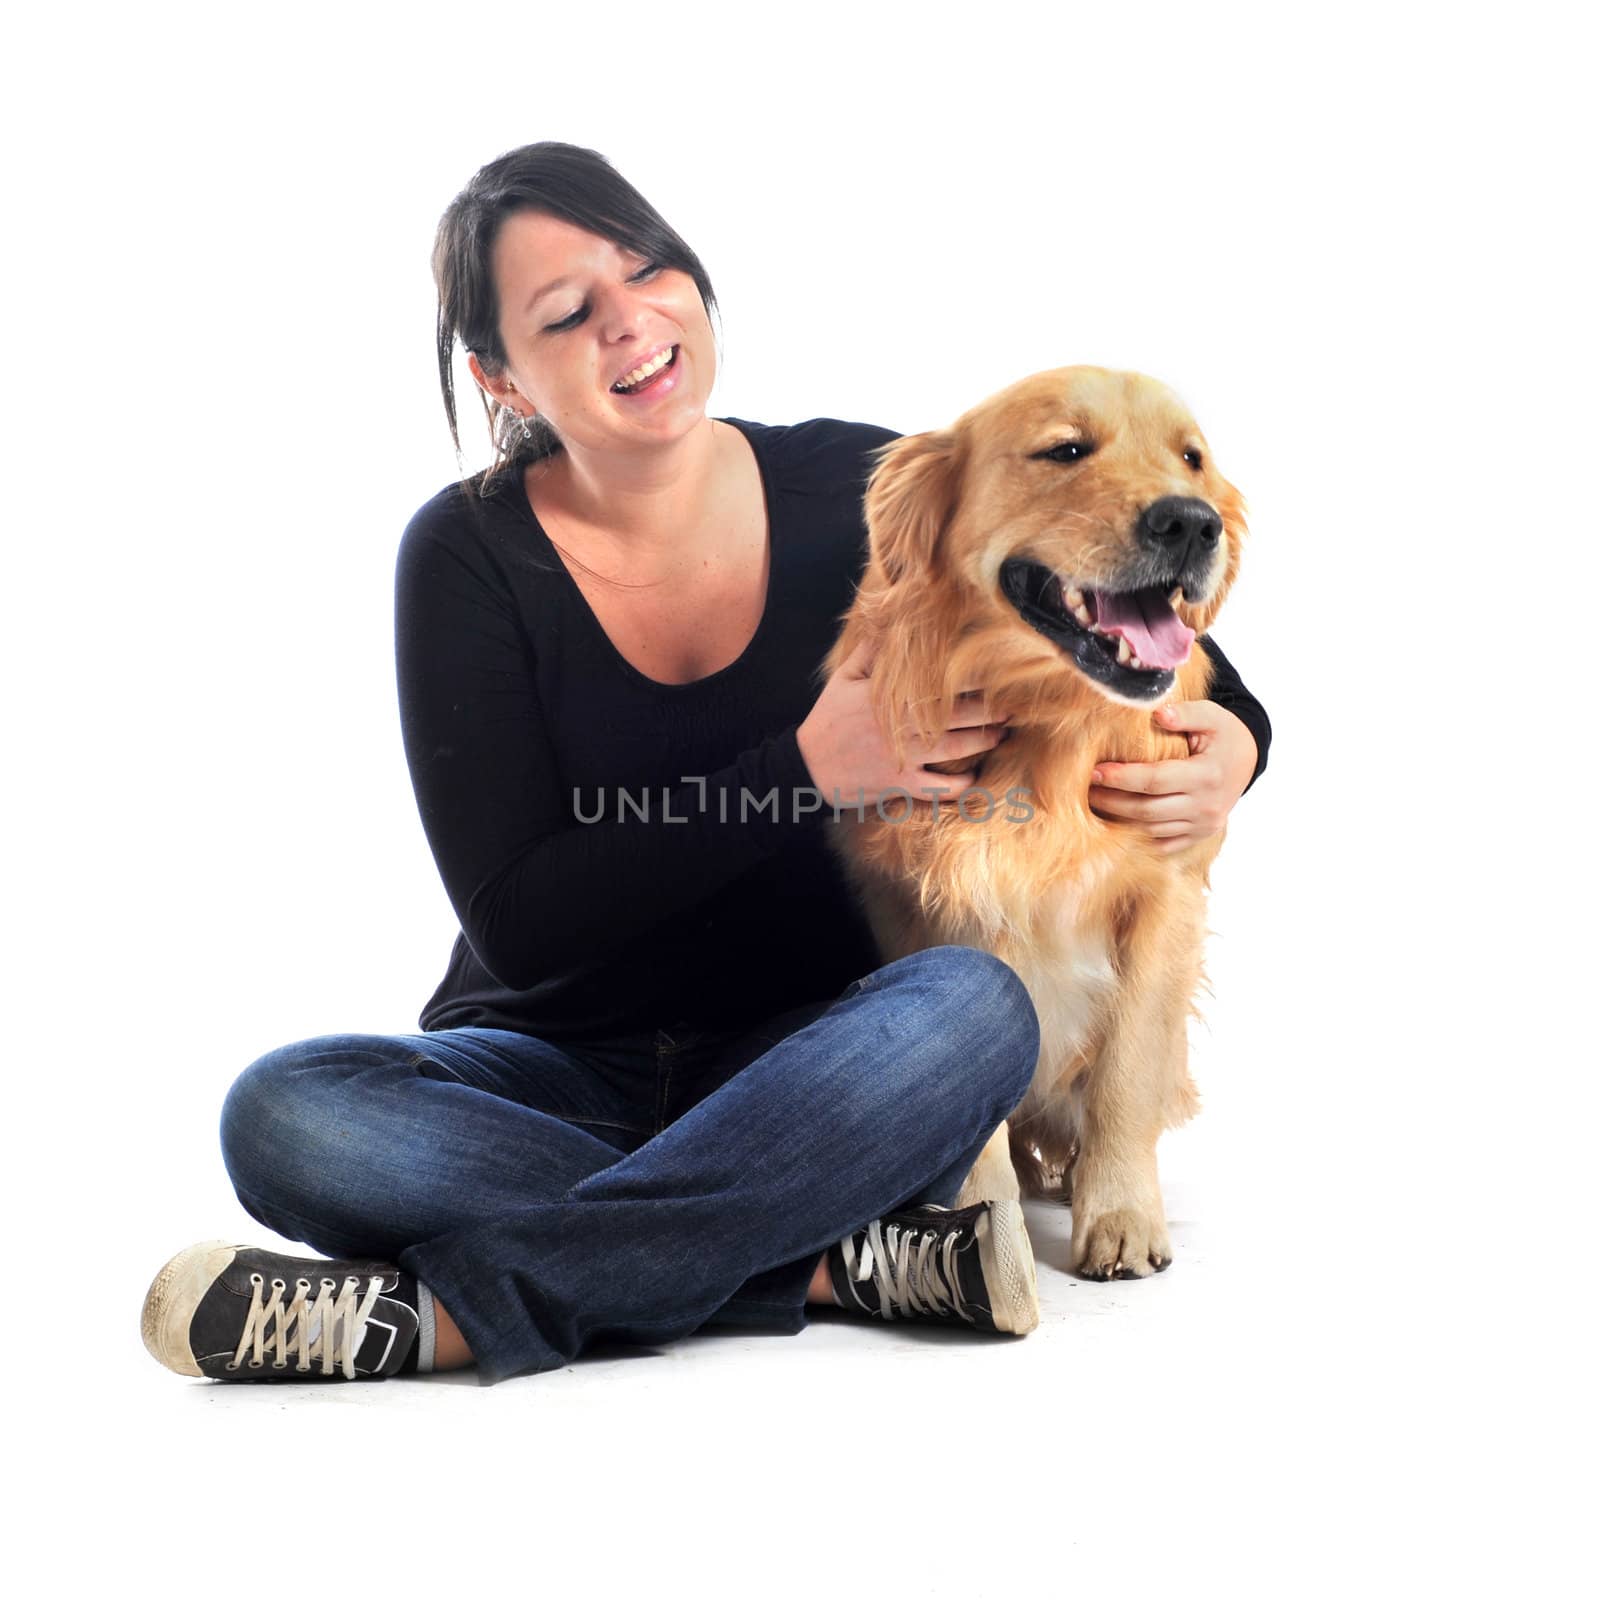 purebred golden retriever and woman in front of a white background